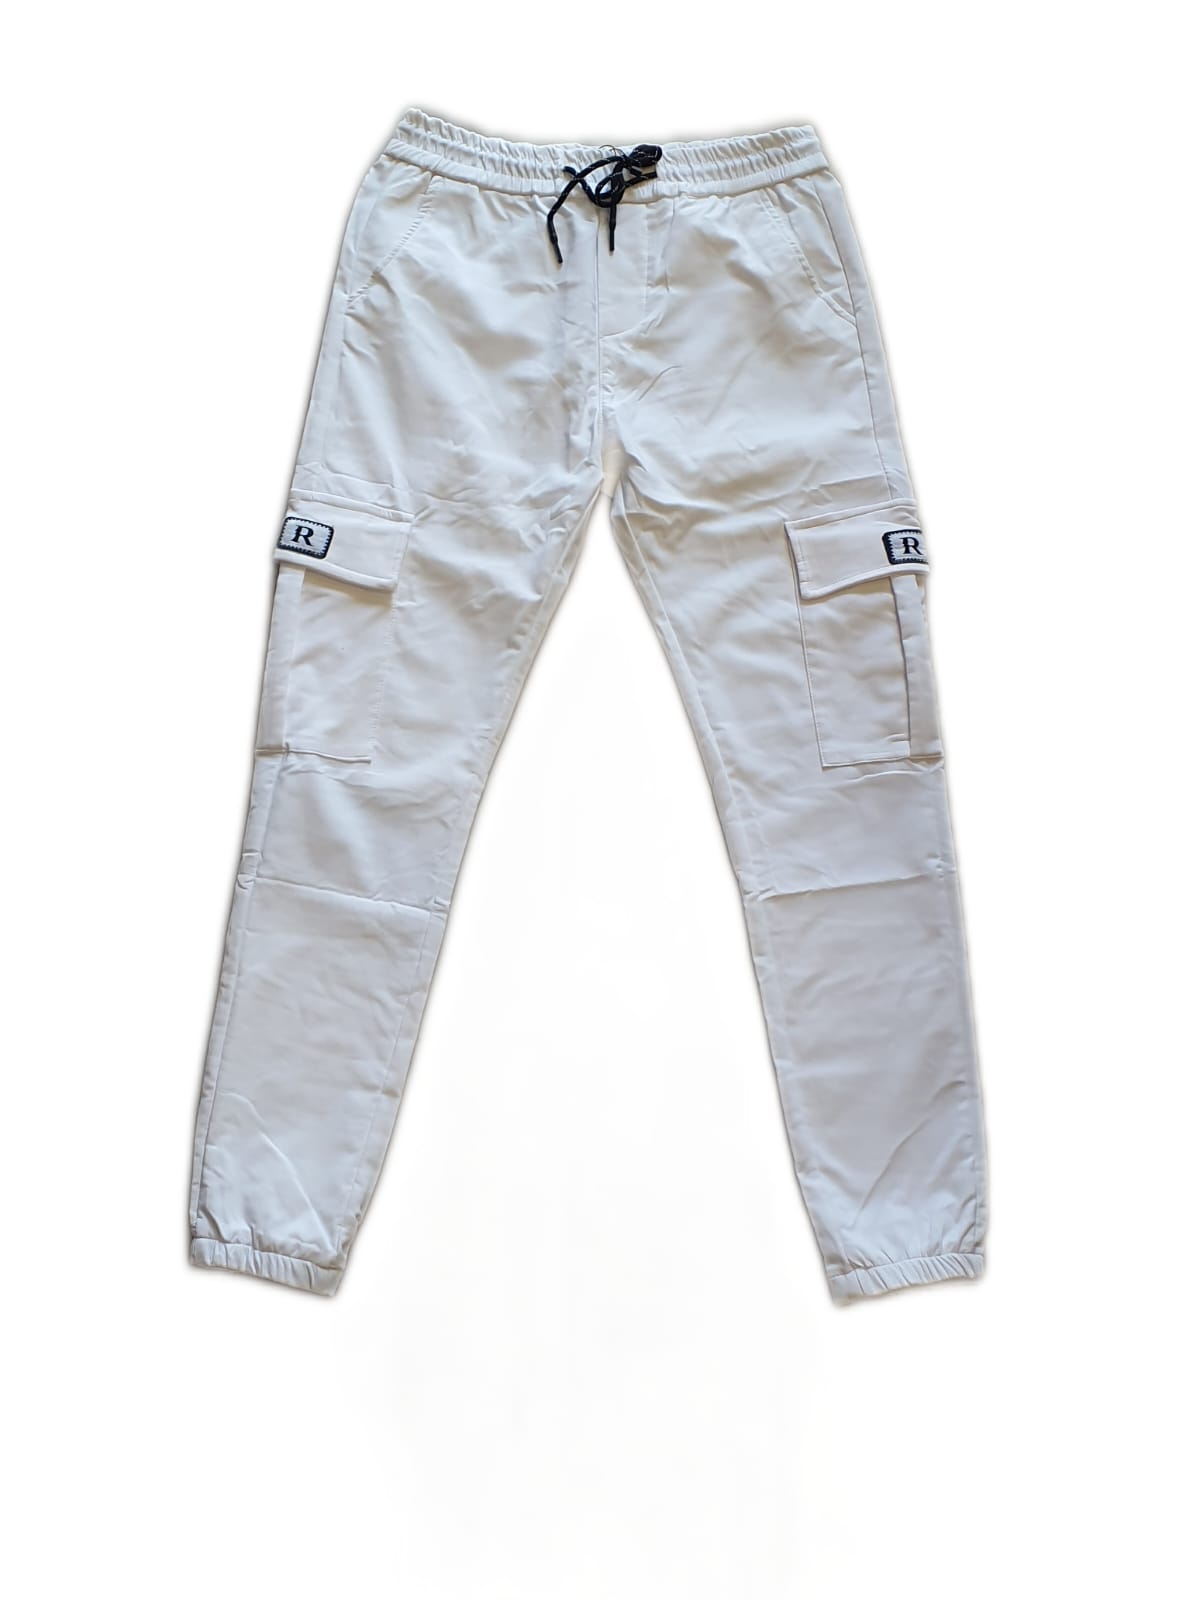  Cargo Pants for Men Solid Casual Multiple Pockets